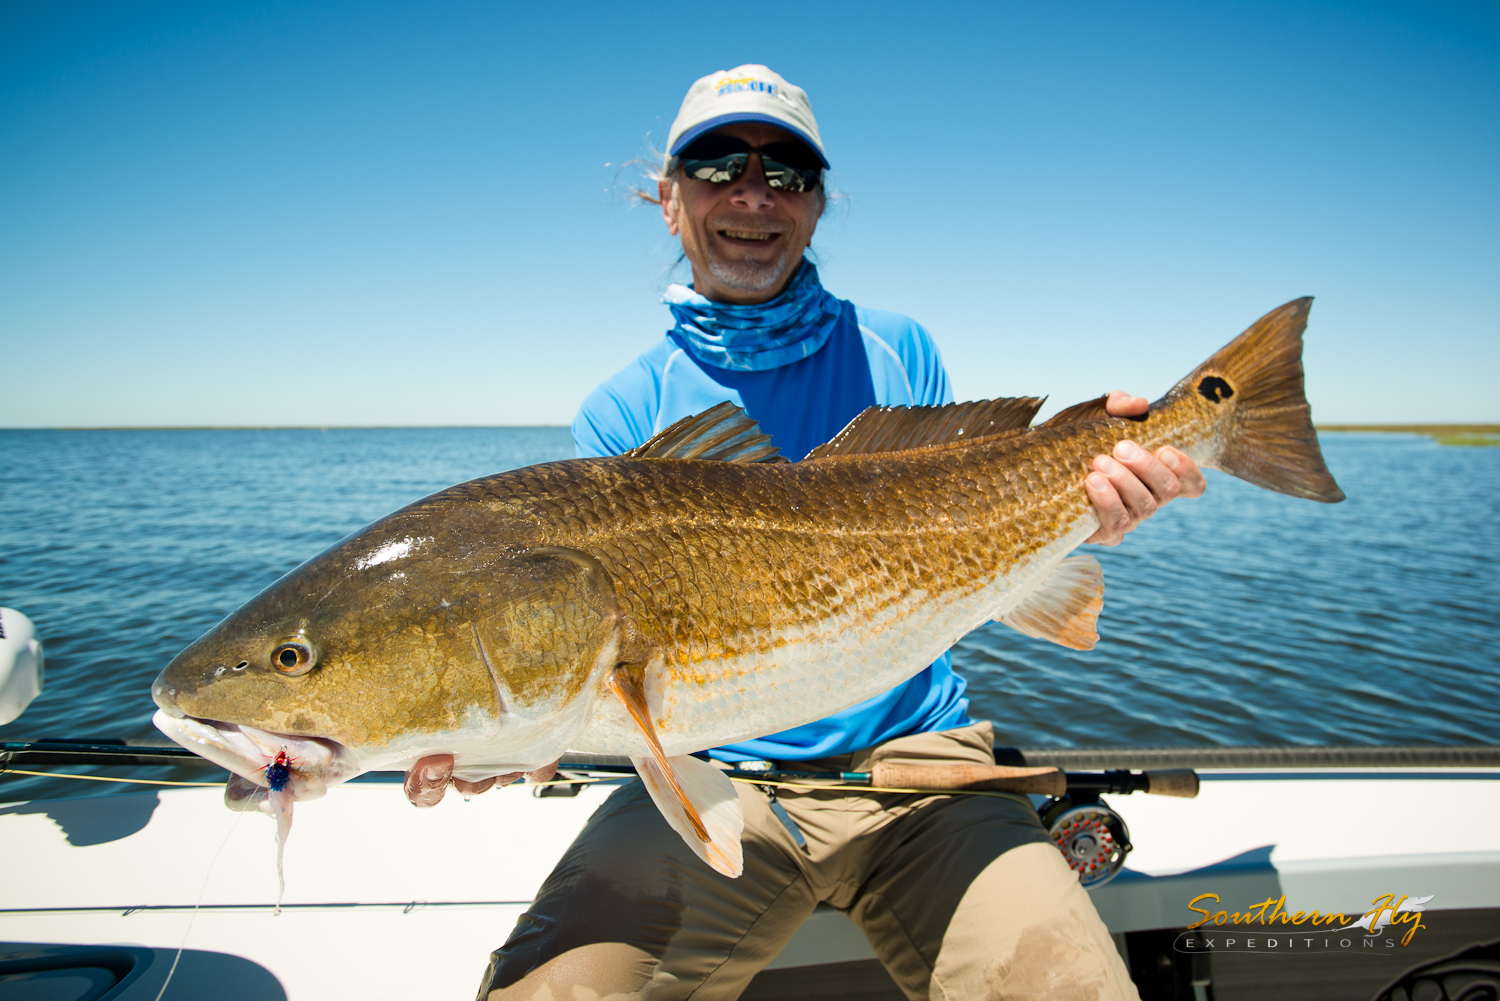 Minnesota Anglers Fly Fishing in New Orleans with Southern Fly Expeditions 